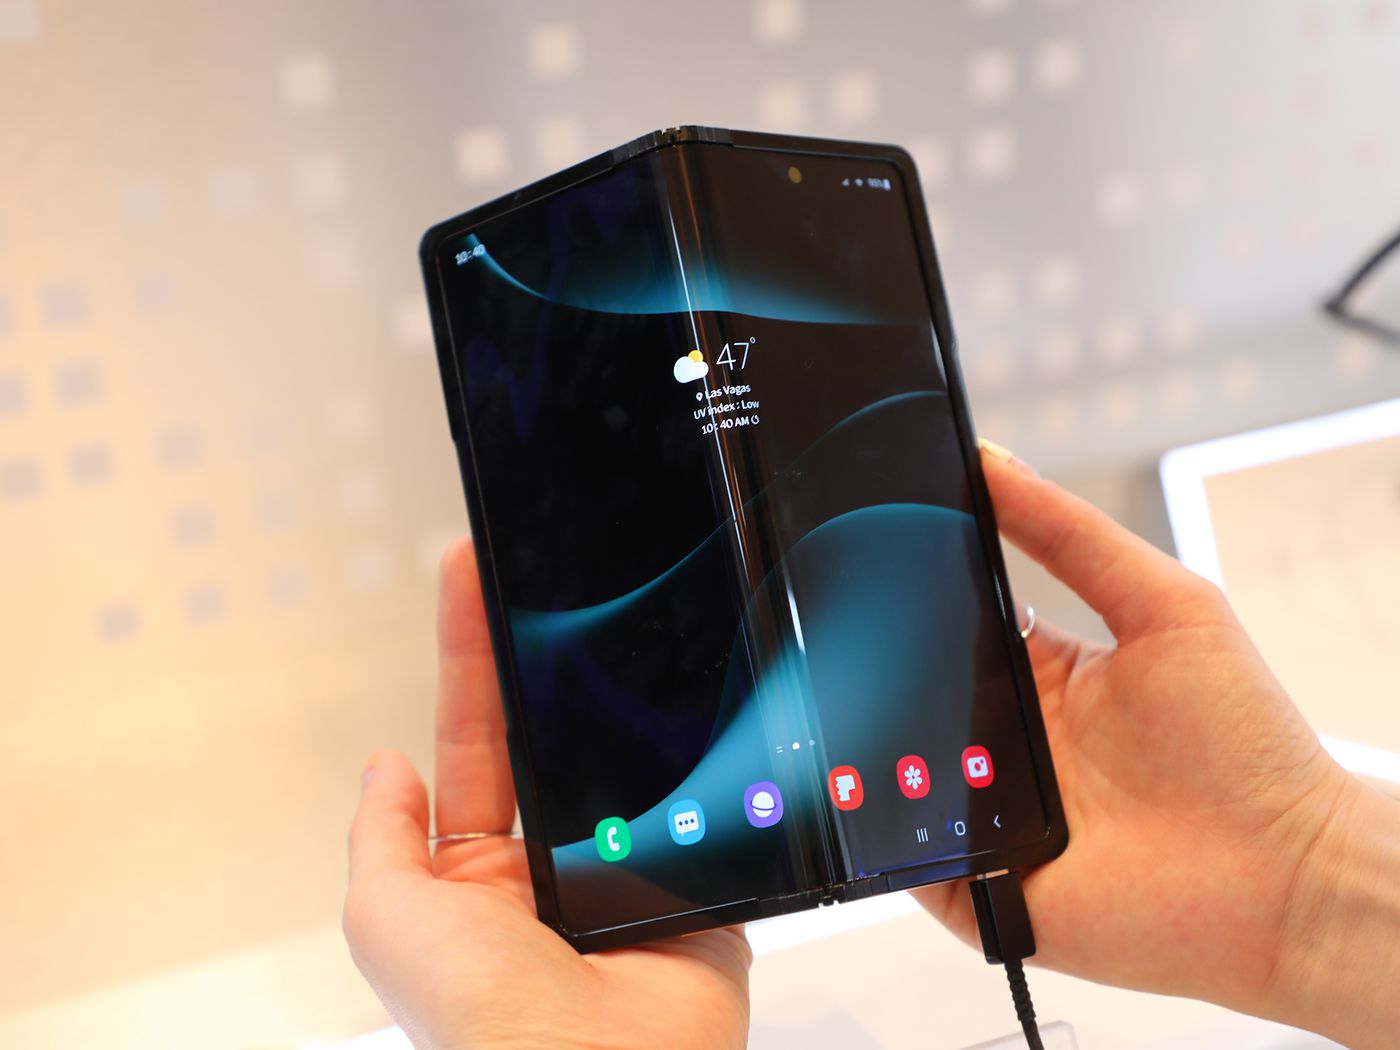 Samsung introduced a new flexible display Flex In & Out, which can be folded in both directions